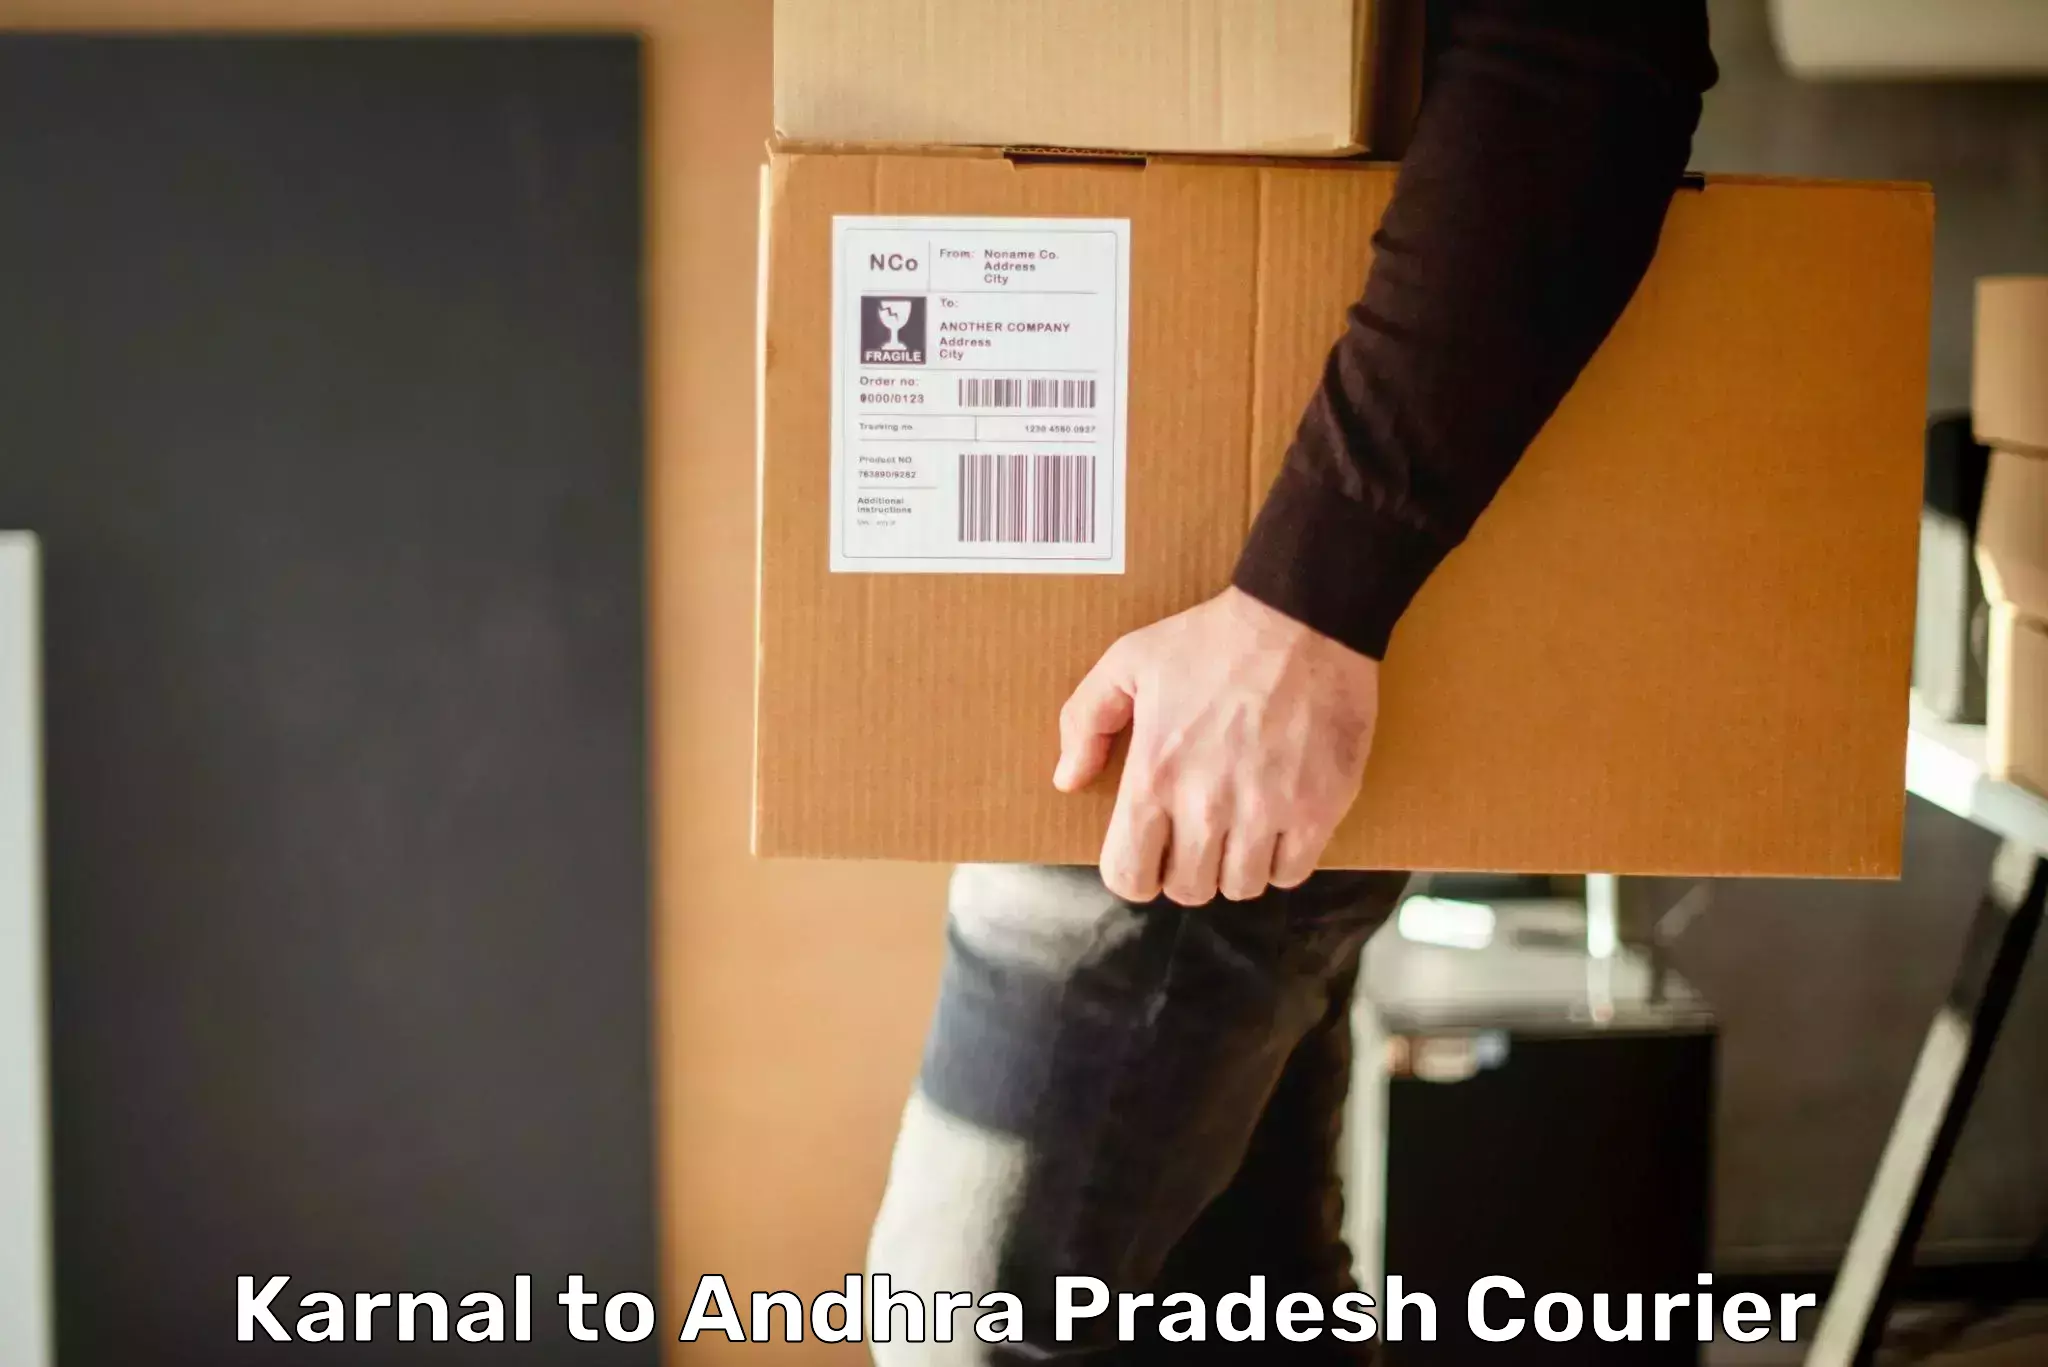 Affordable parcel service Karnal to Addateegala